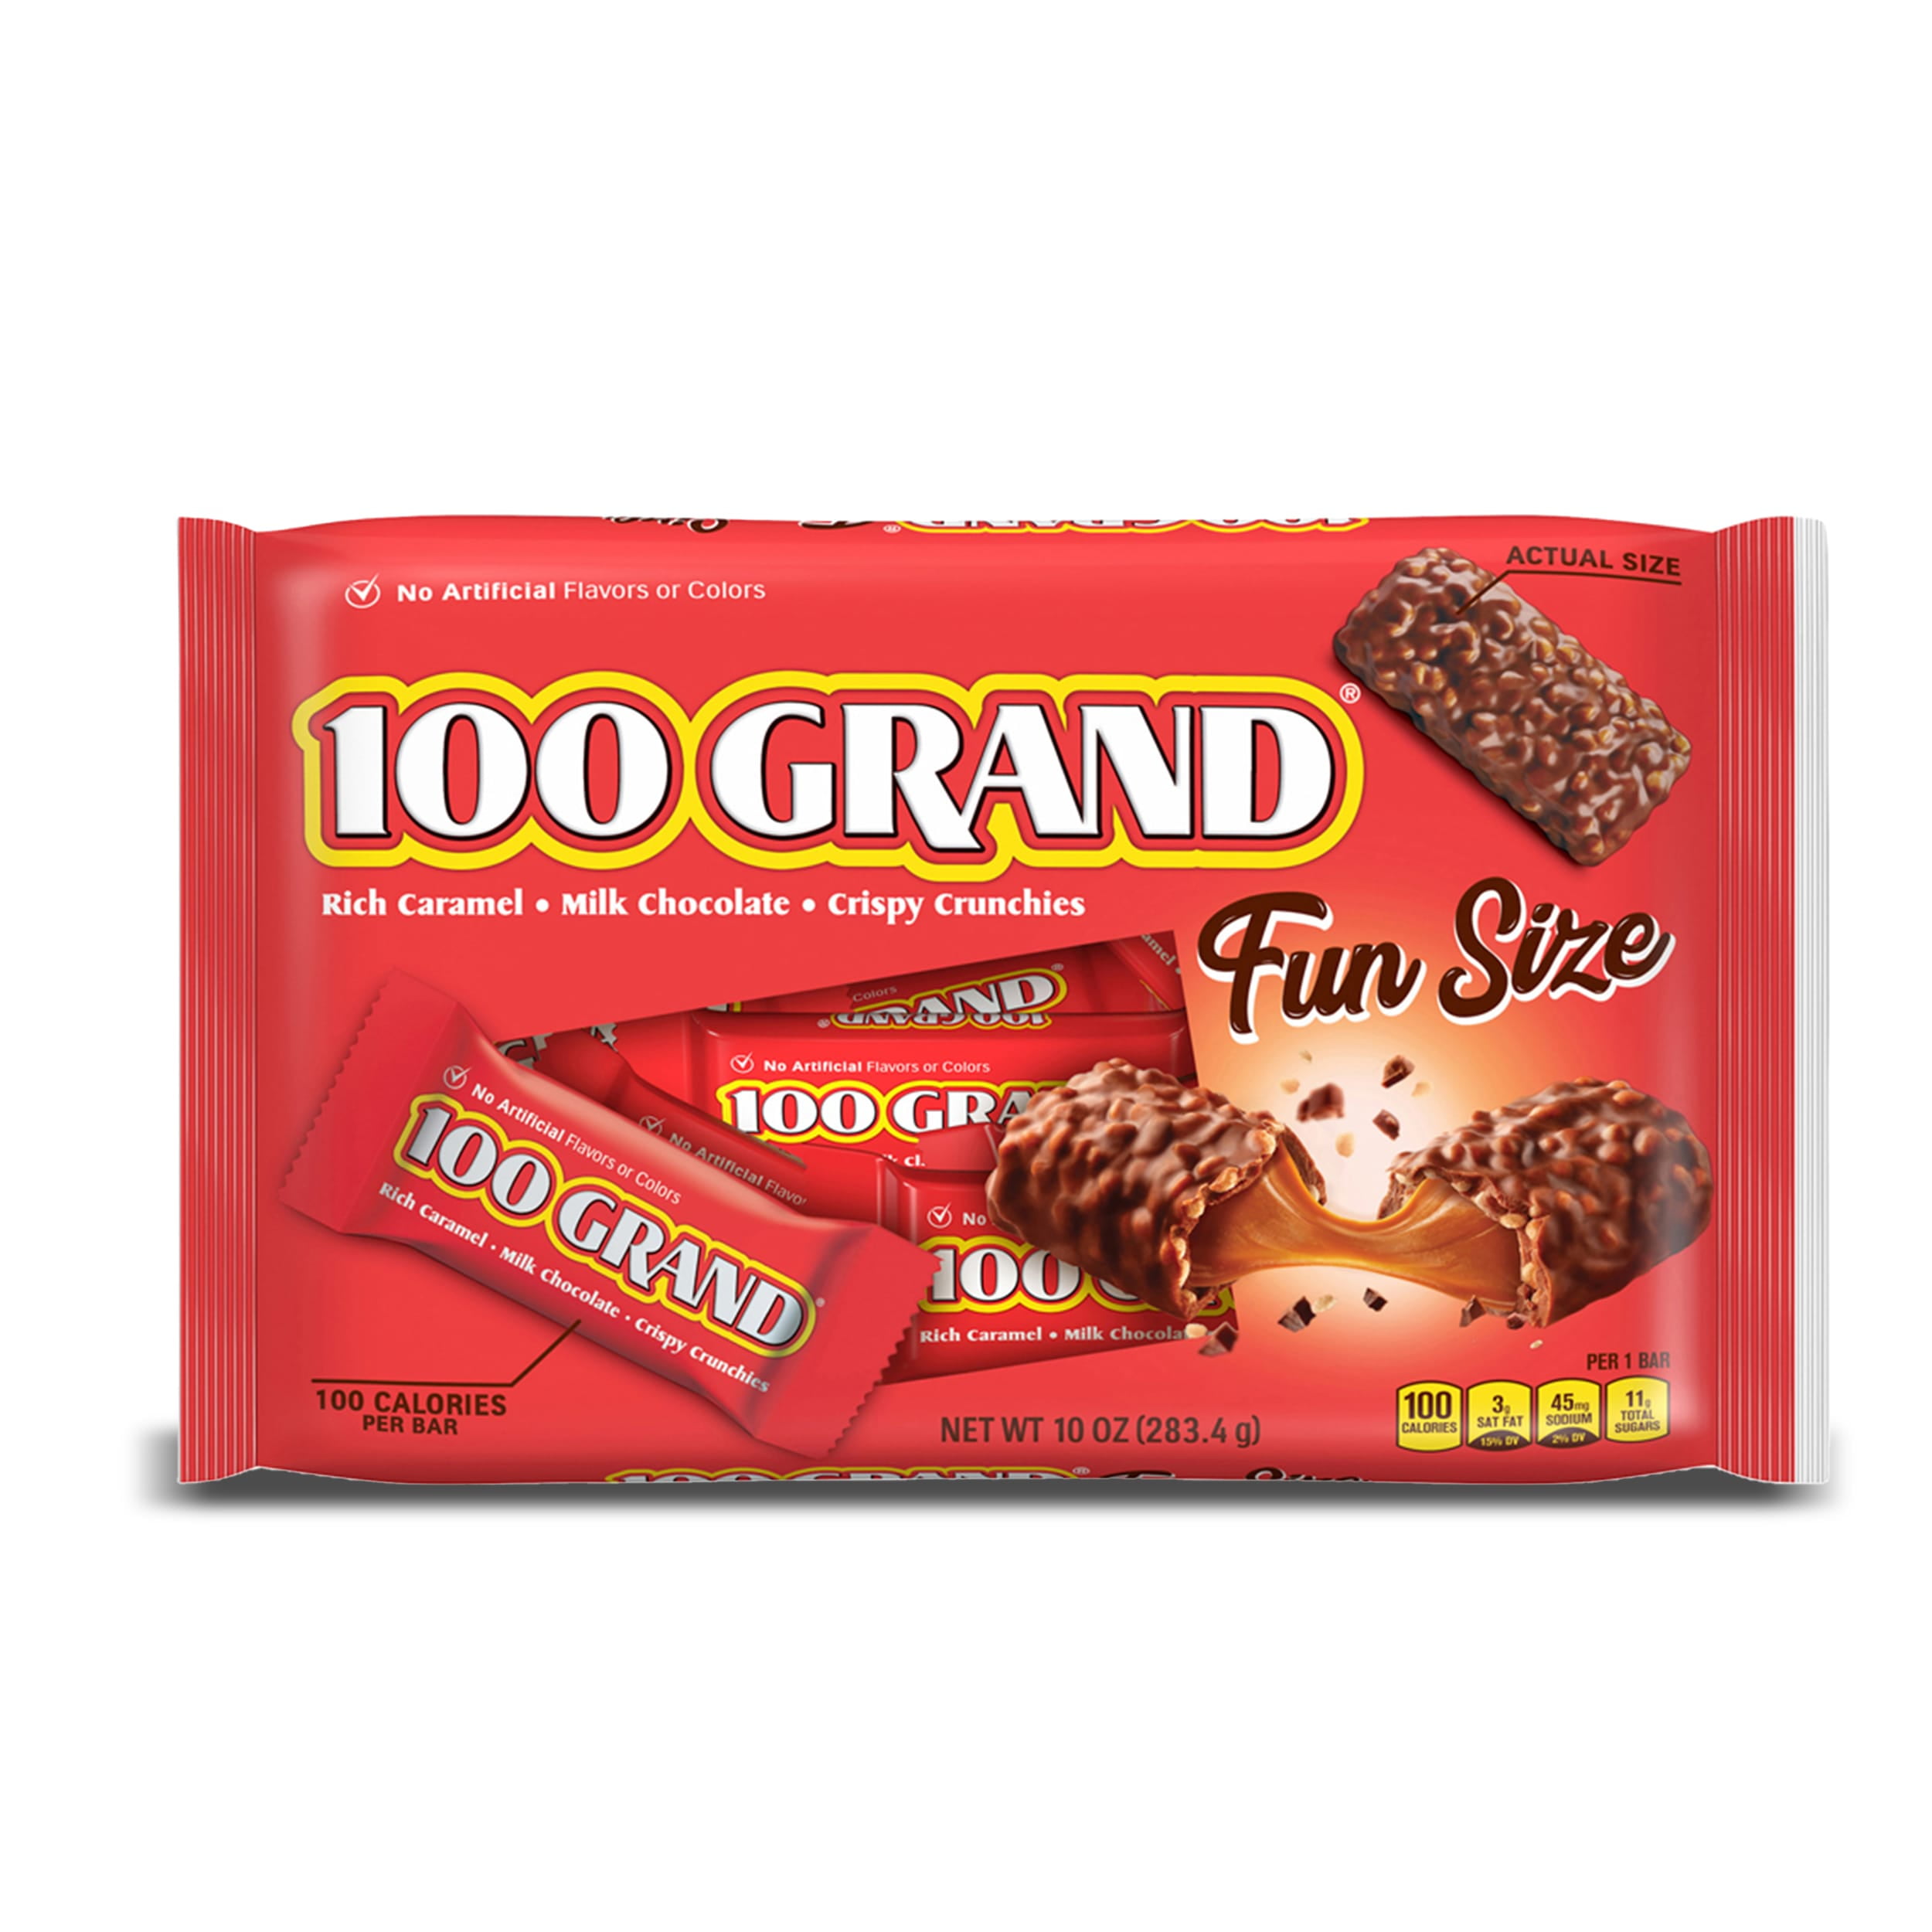 (1 Bag) 100 Grand Crispy, Milk Chocolatey With Caramel, Fun Size Individually Wrapped Candy Bars, Easter Basket Stuffers, 10 oz